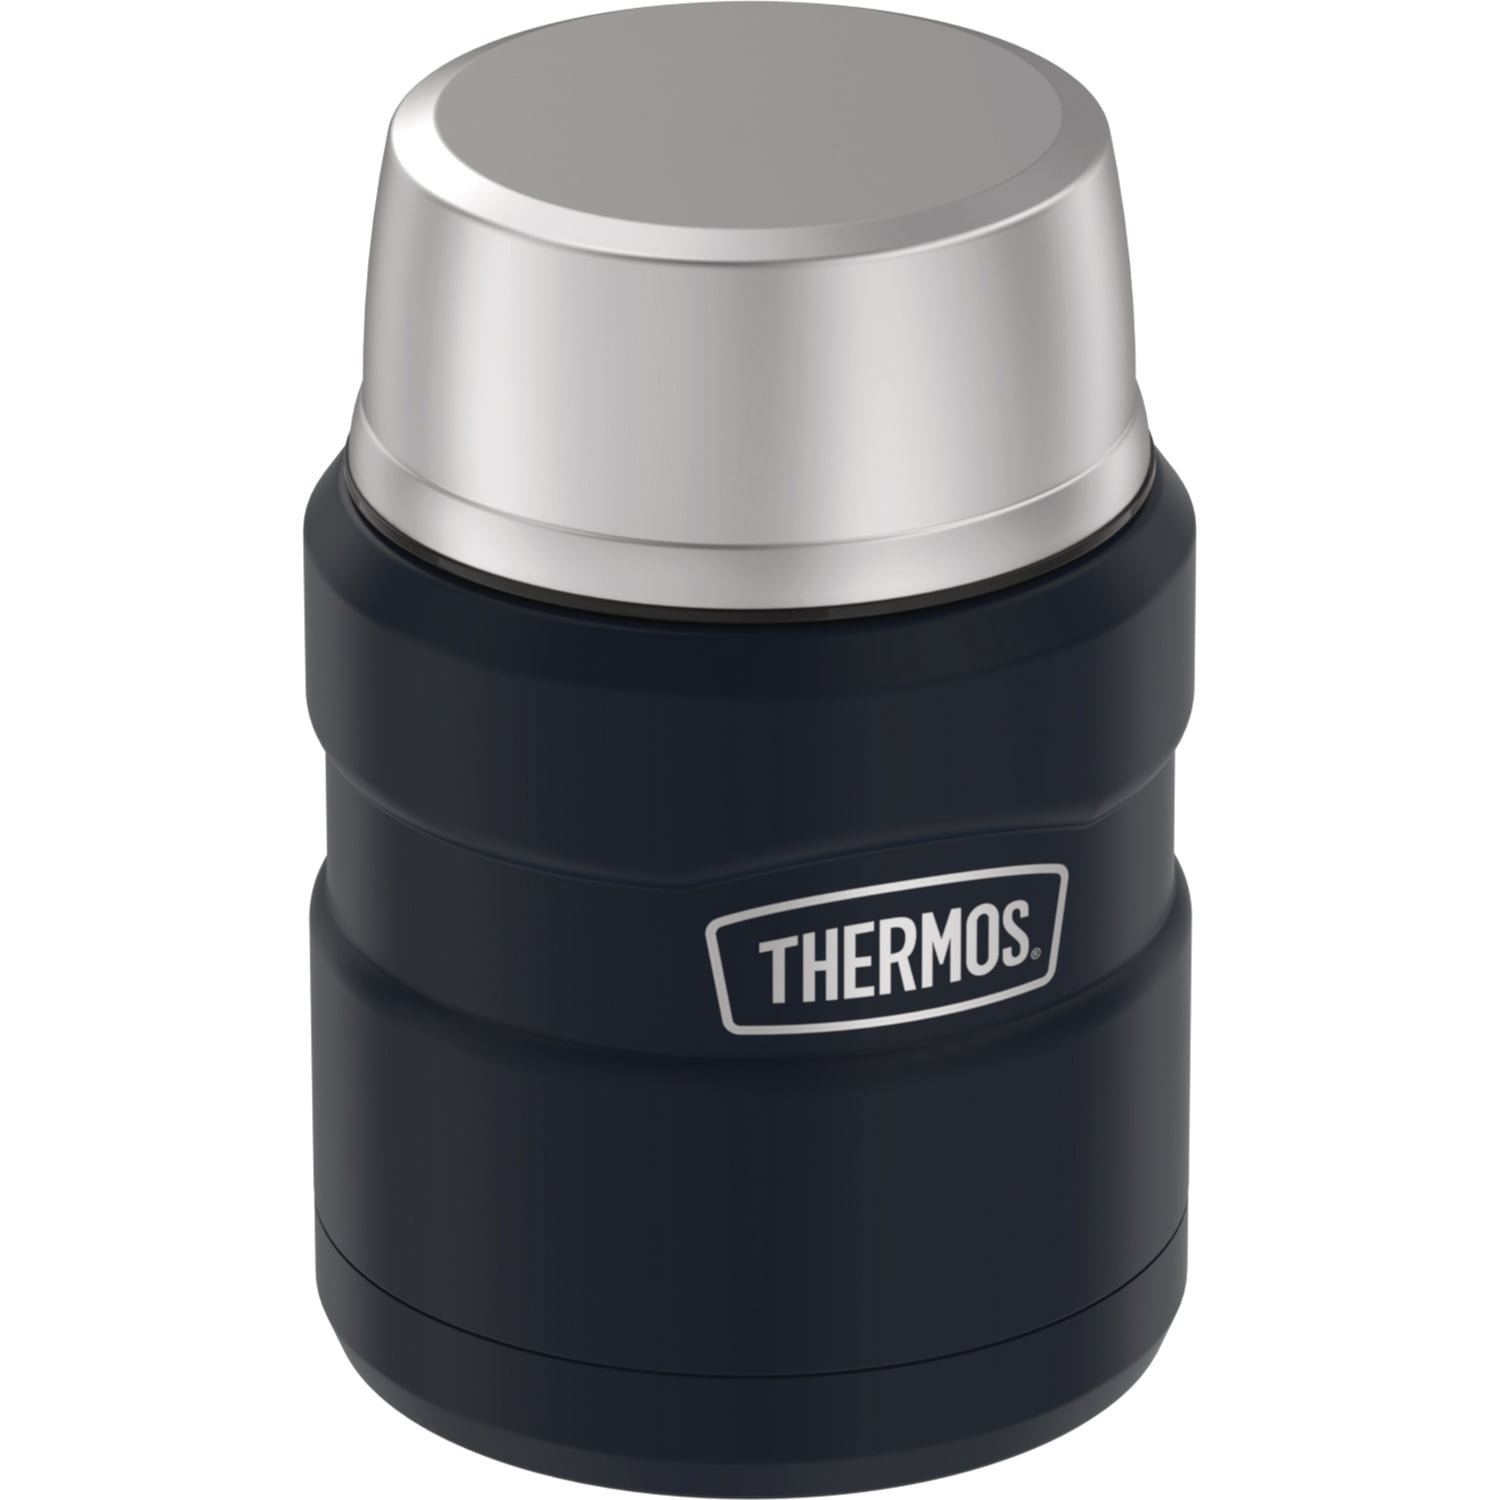 SLHKPNS Japanese Flying Crane Bird Thermos for Hot Food 17OZ Insulated  Thermos Food Jar with Folding Spoon/Handle Sunset Cloud Sky Soup Thermos  Food